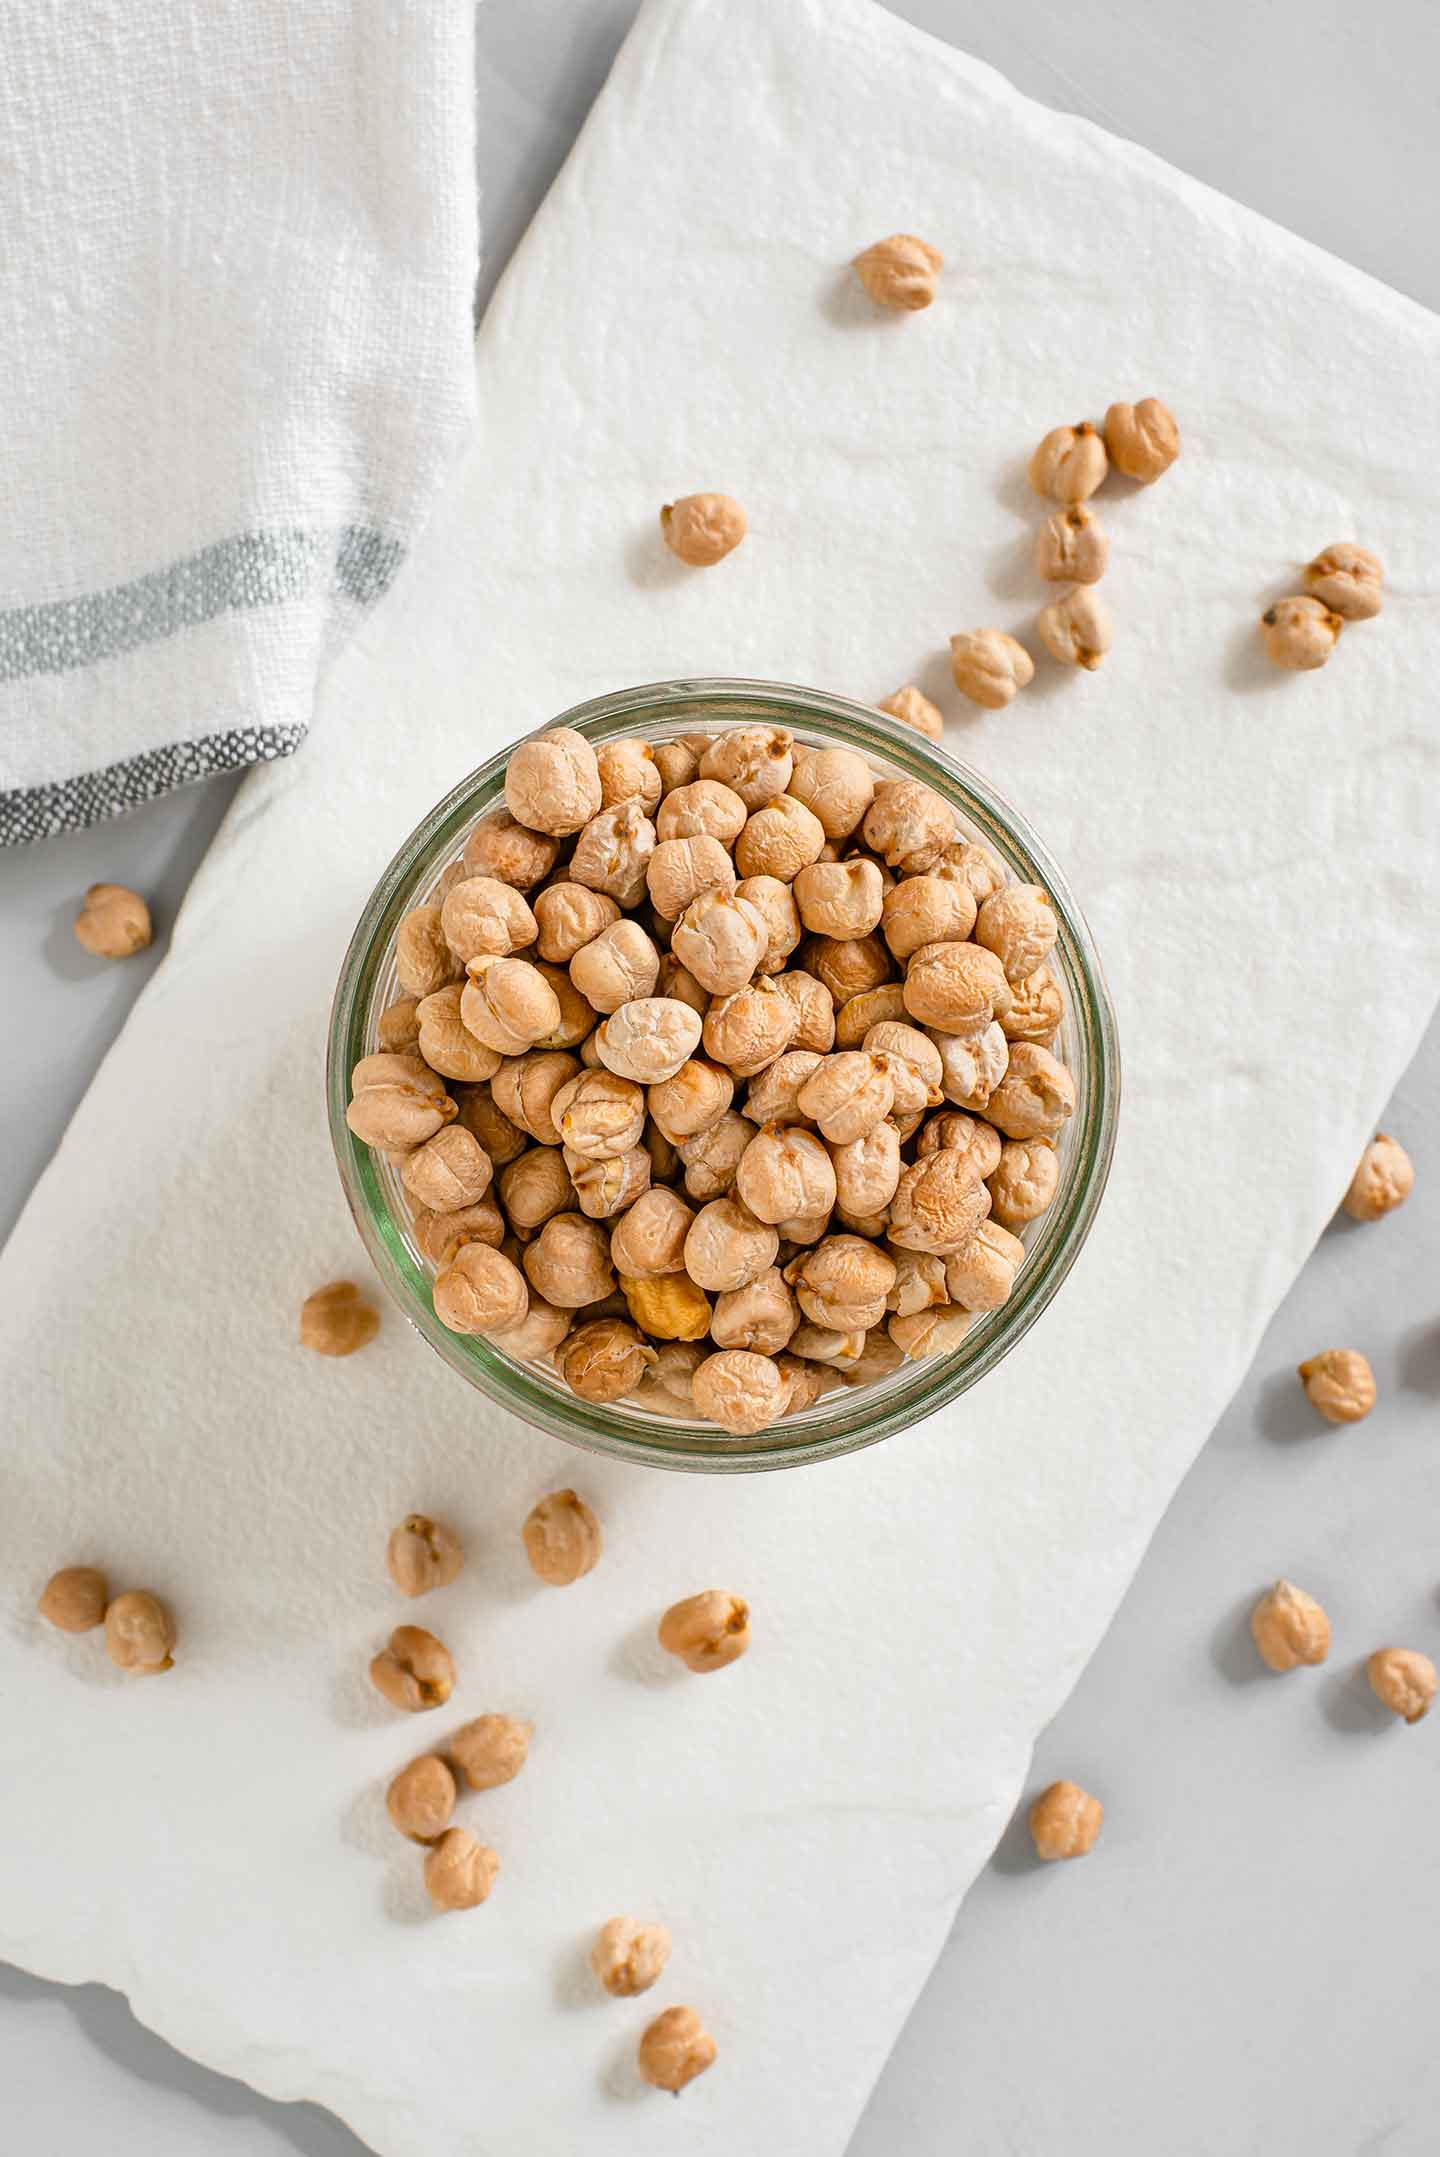 Top down view of dried chickpeas in a small glass jar on a white tray. A dish towel and more dried chickpeas are scattered around.